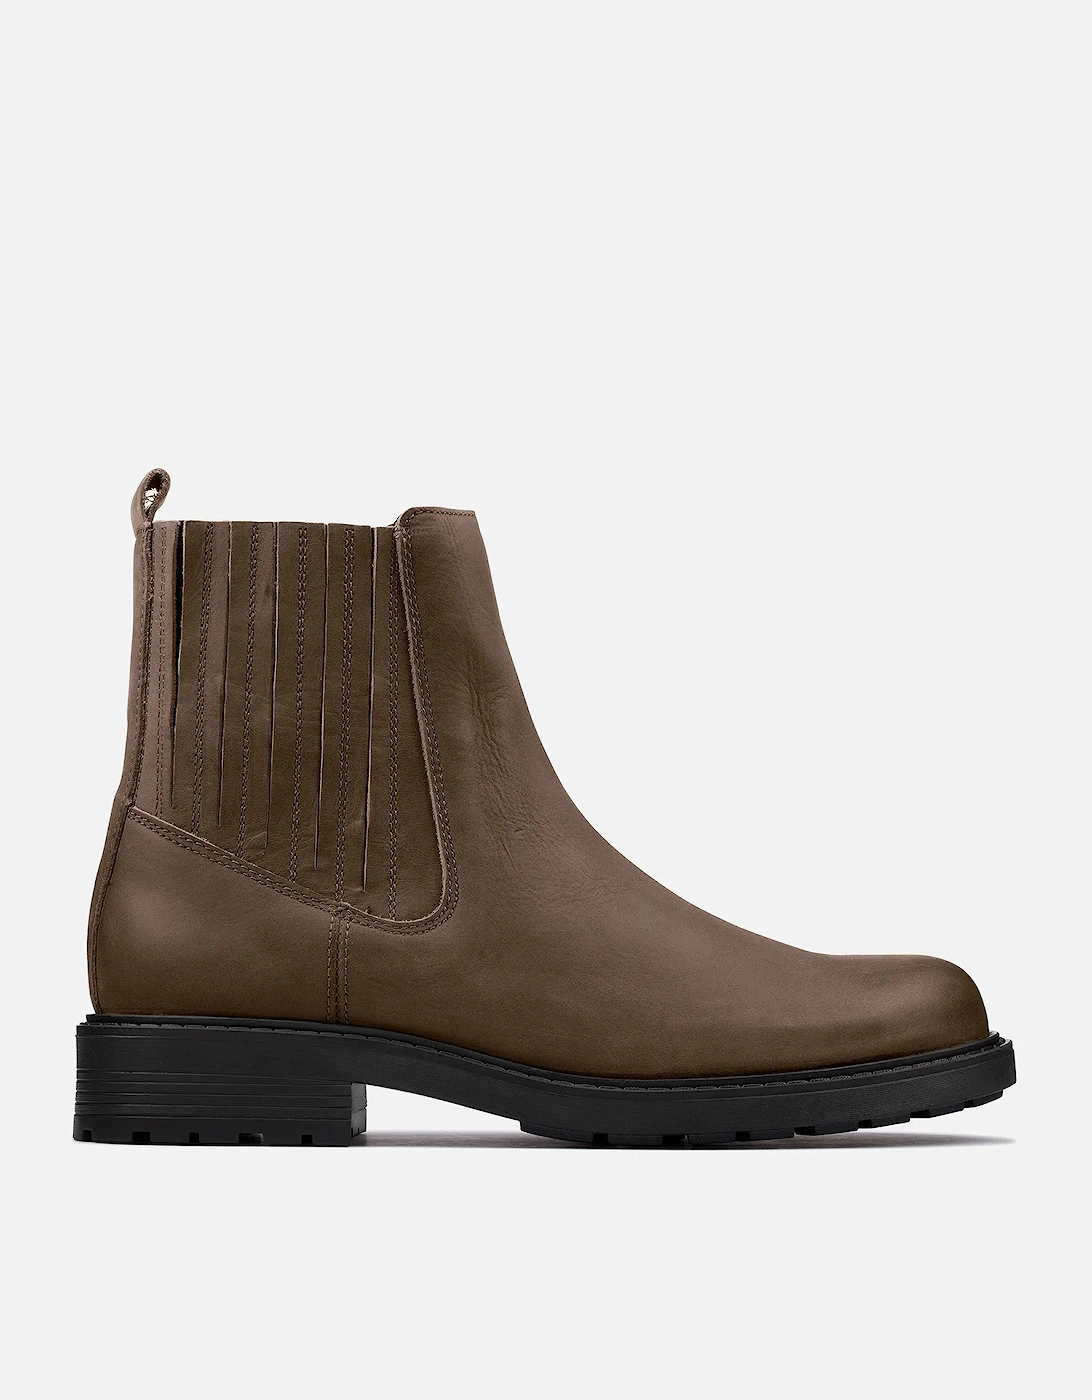 Orinoco 2 Mid-Length Leather Chelsea Boots - - Home - Women's Shoes - Women's Boots - Women's Chelsea Boots - Orinoco 2 Mid-Length Leather Chelsea Boots, 2 of 1